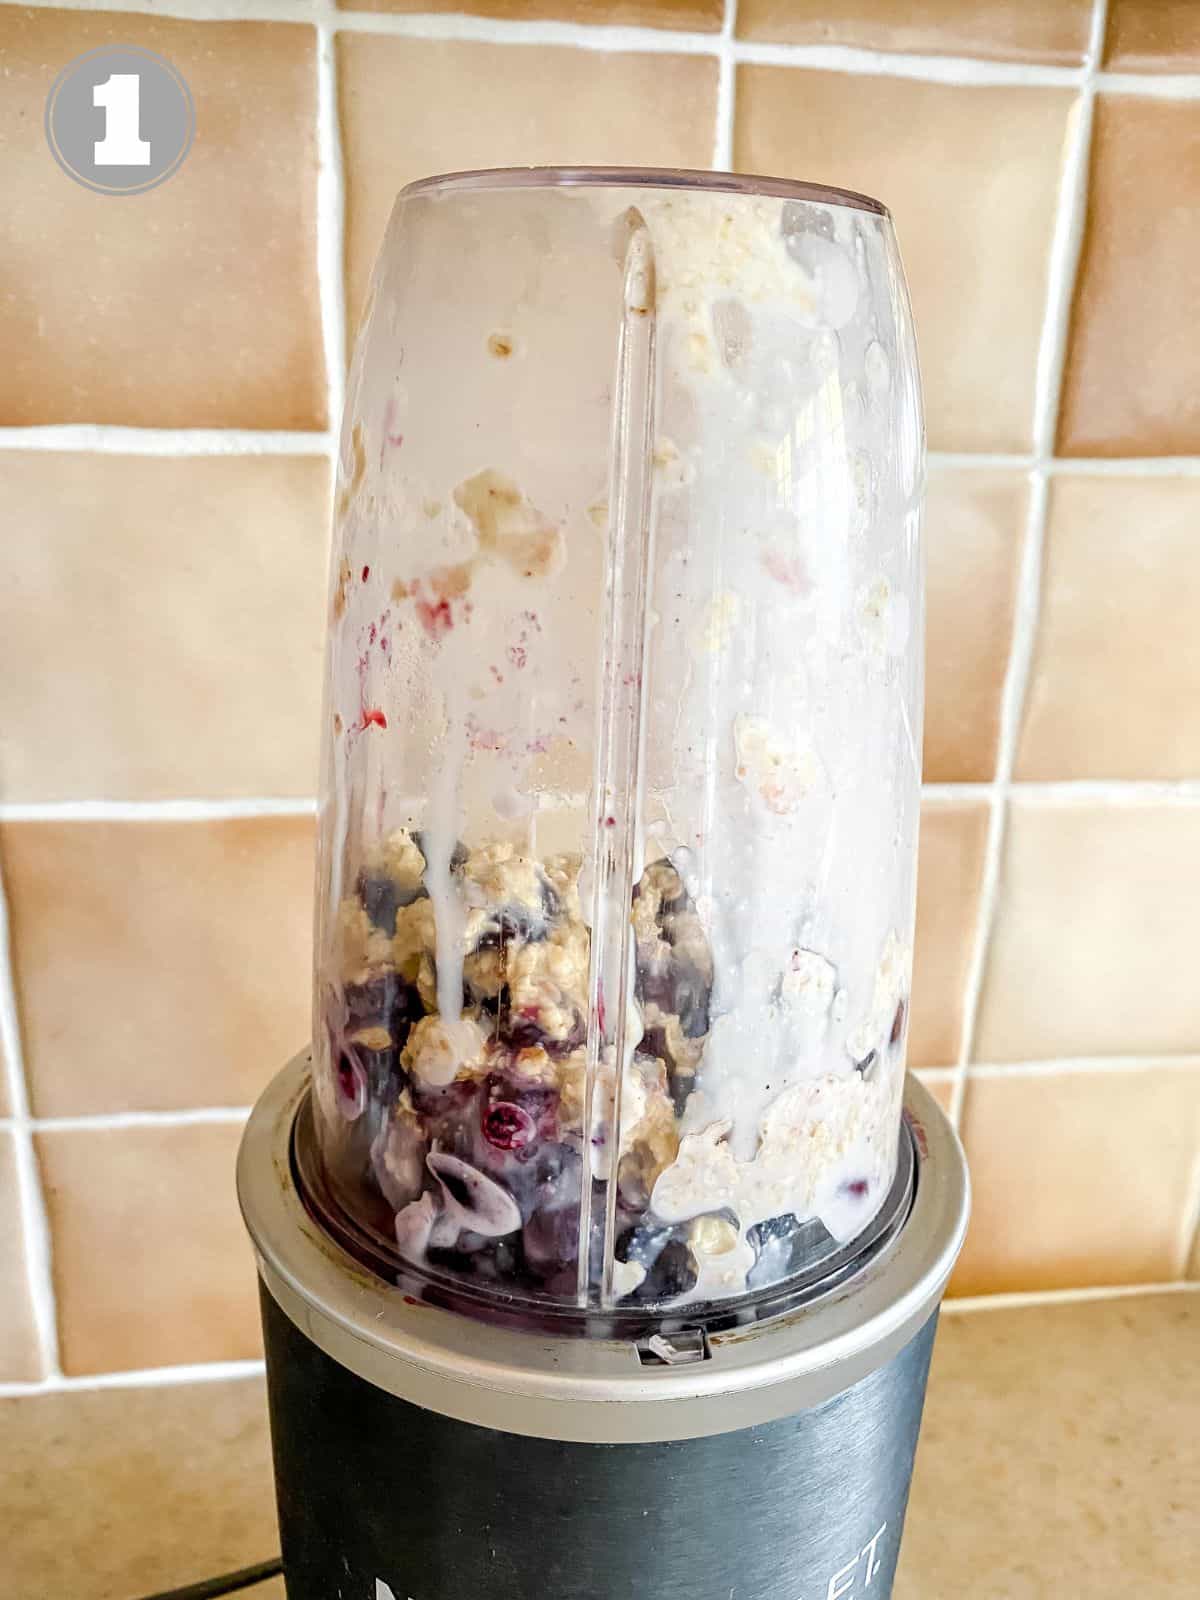 smoothie ingredients in a blender in front of a brown tiled wall.